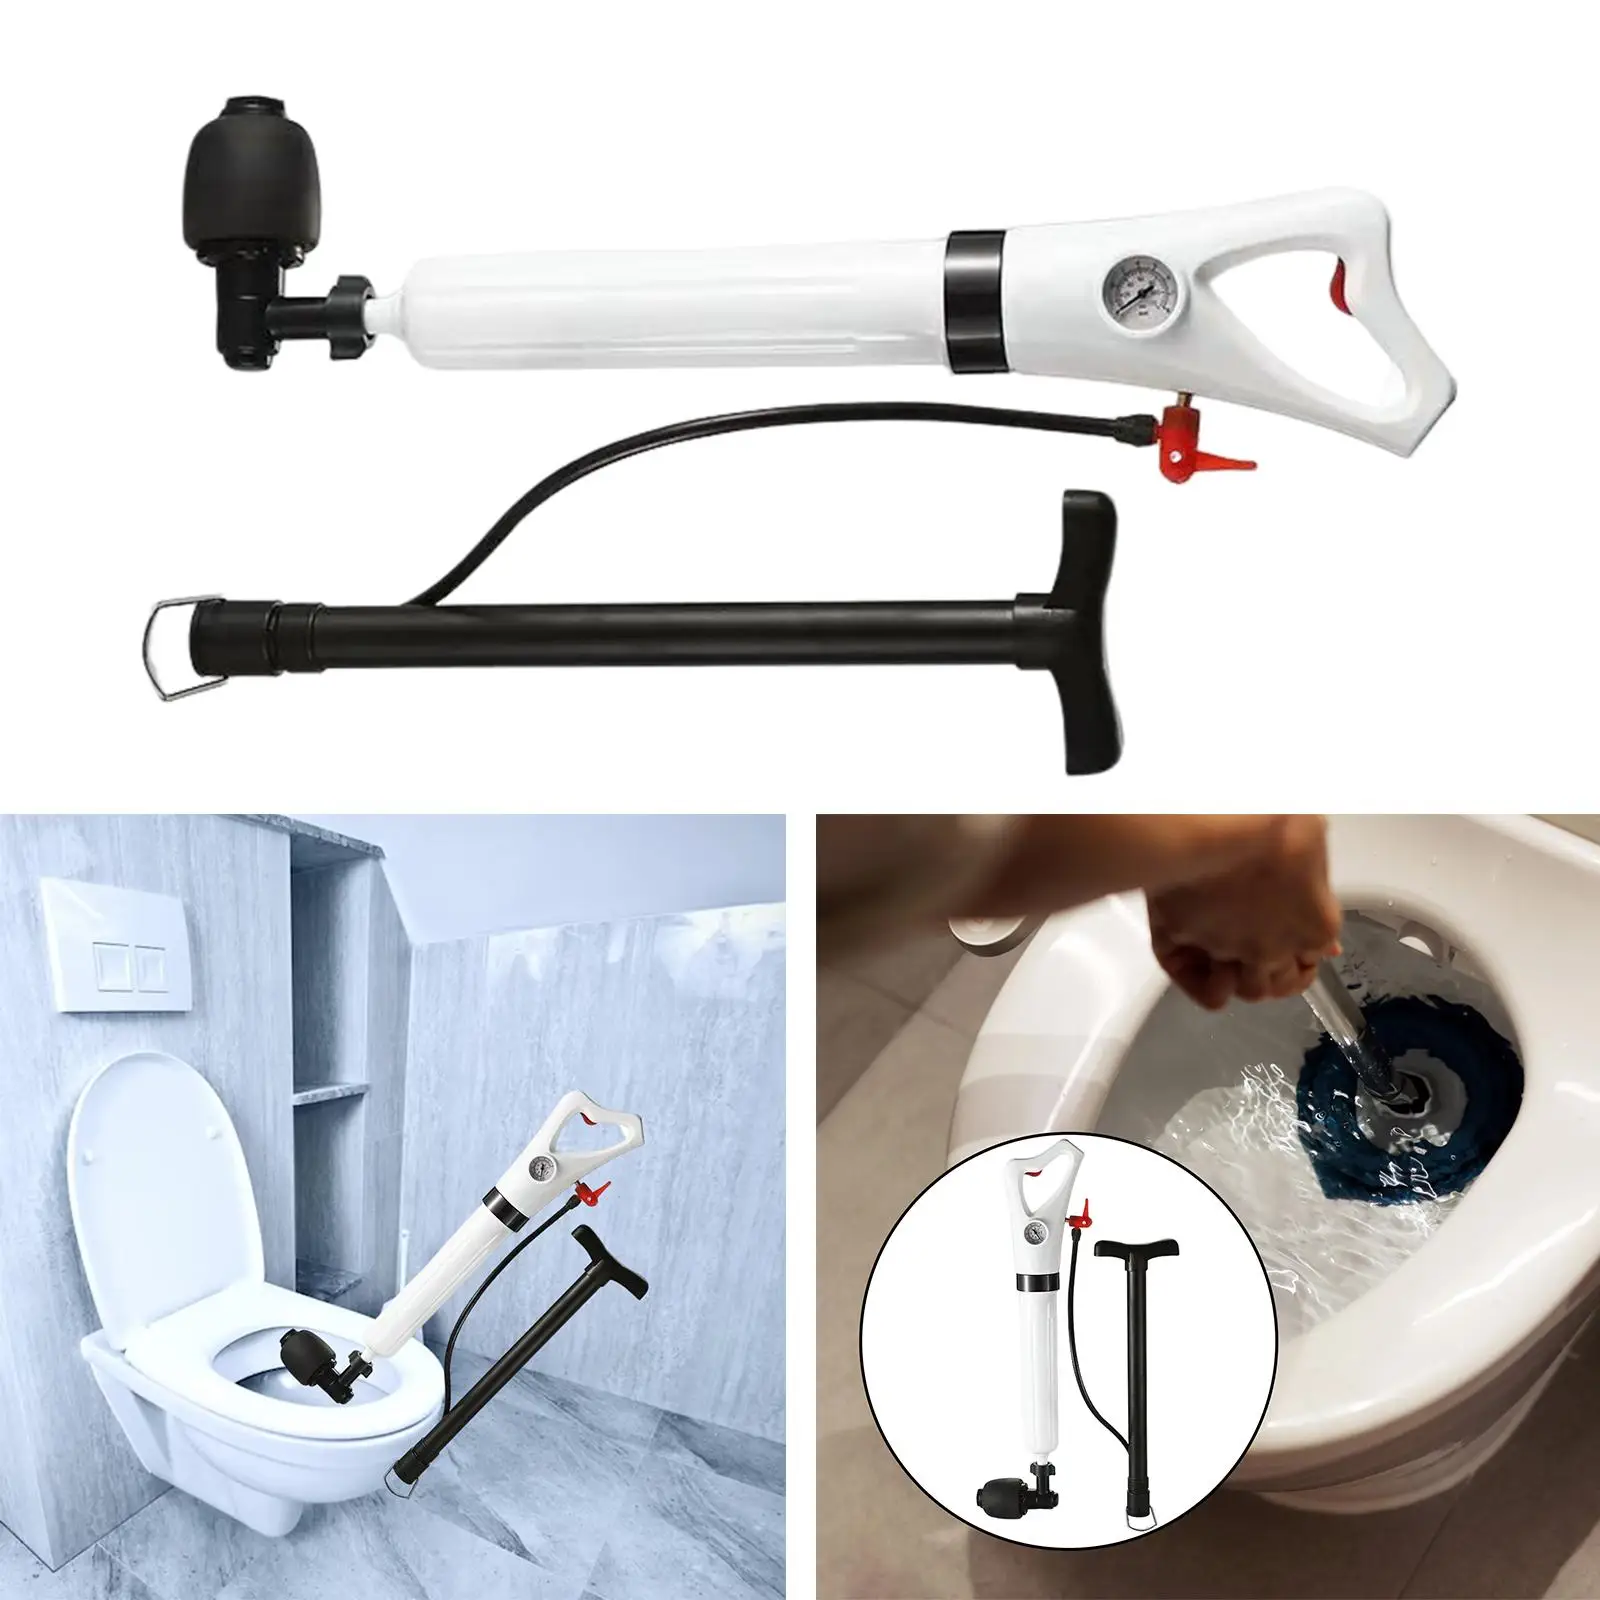 Toilet Plunger set Air power Plumbing Tools Manual Powerful for Bathroom Bath Clogged Pipe Squat